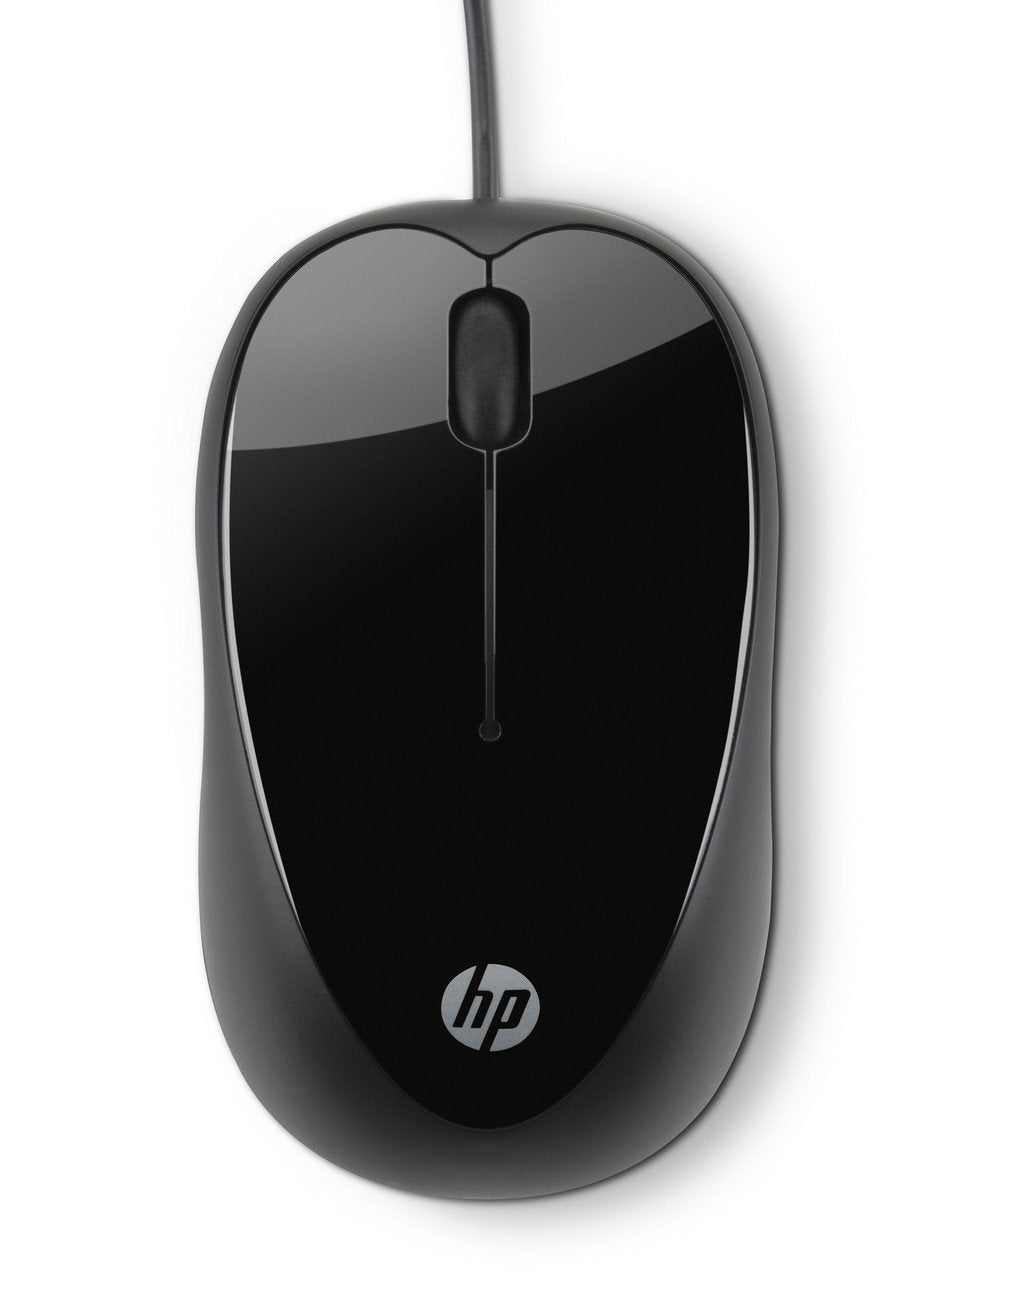 HP X1000 Wired Mouse (Black and Grey)